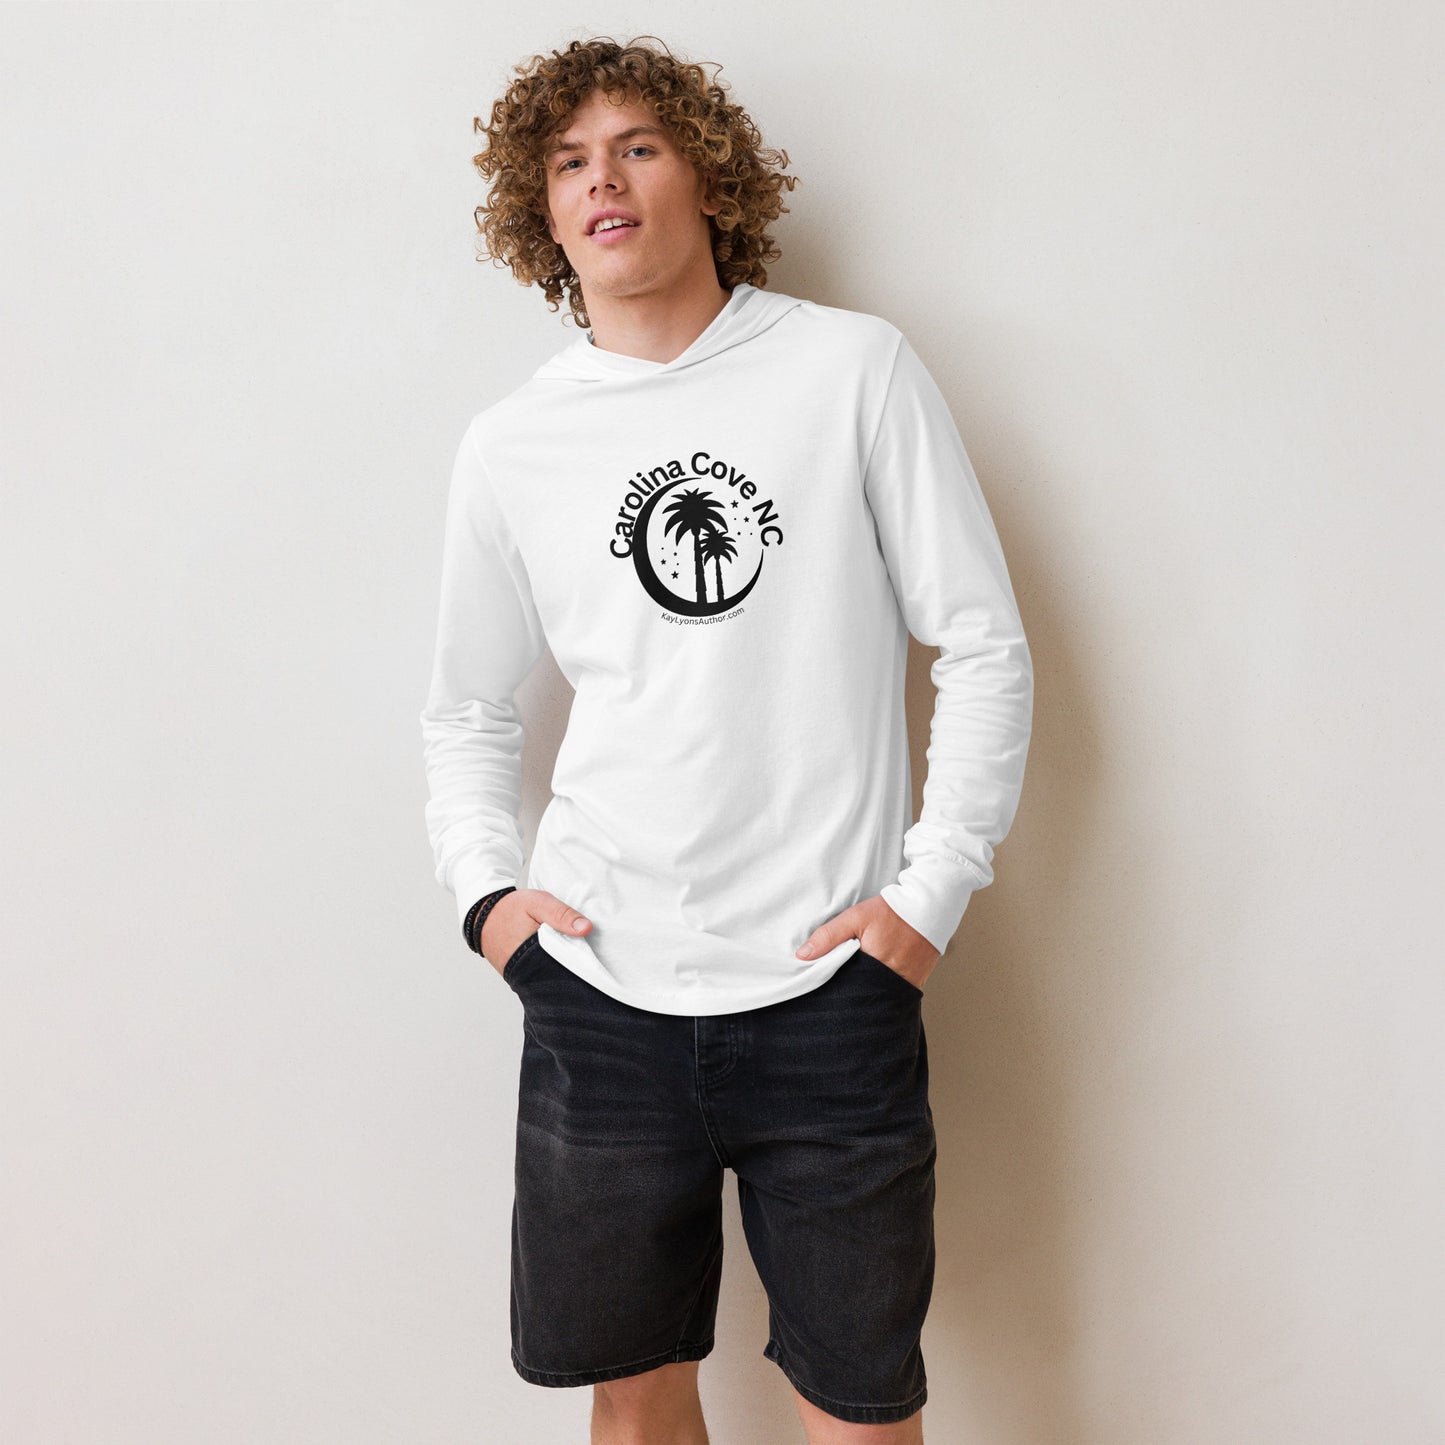 Hooded long-sleeve tee - FEATURING OUR FAVORITE FICTIONAL TOWN CAROLINA COVE NC